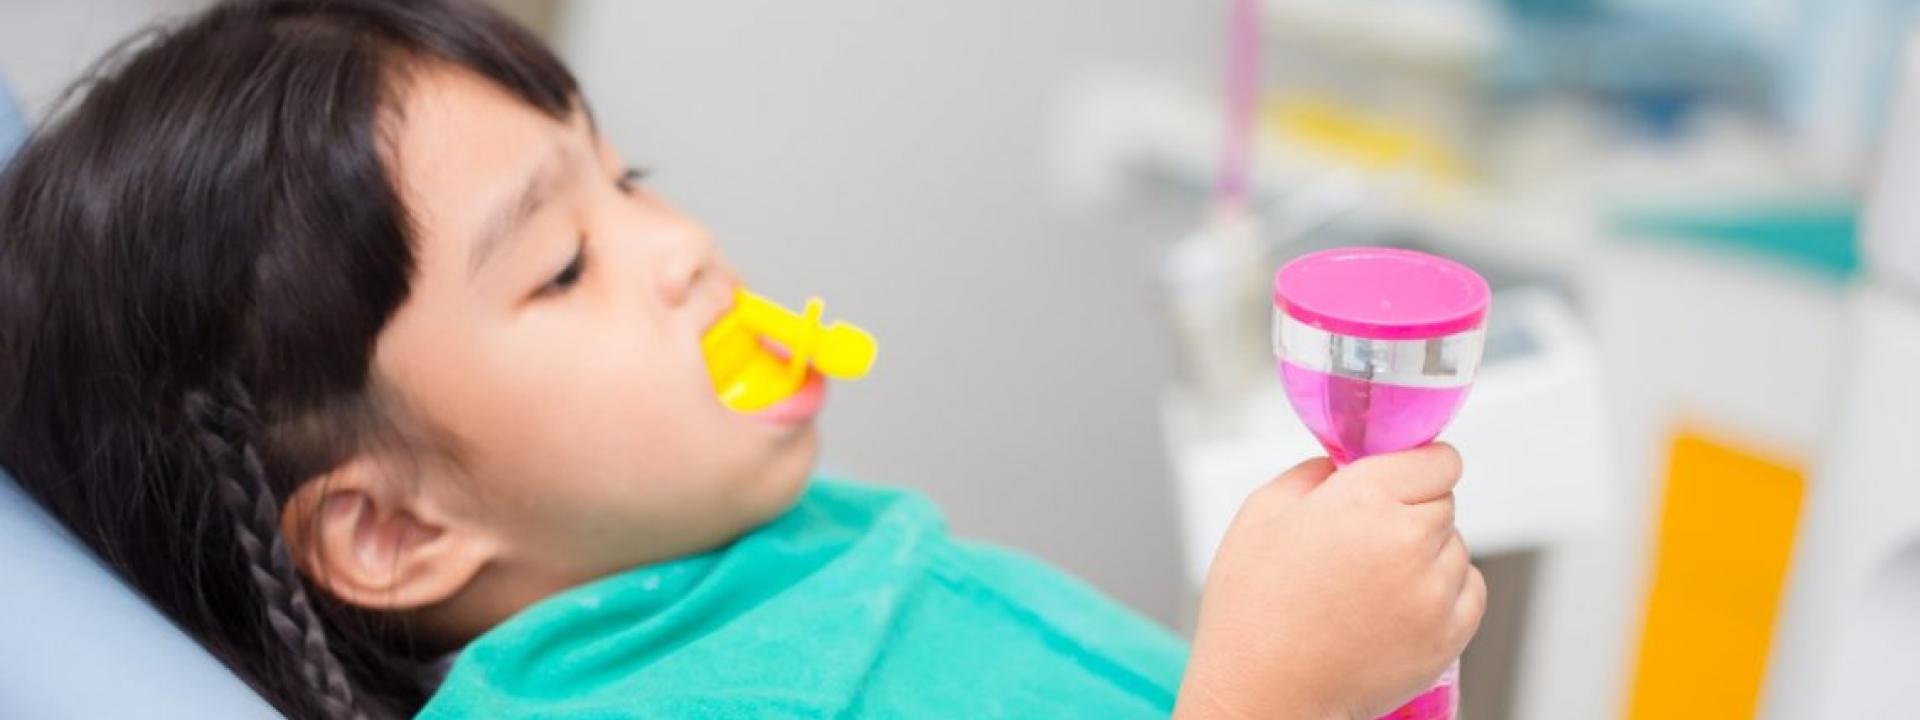 root canal treatment for a 3 year old baby